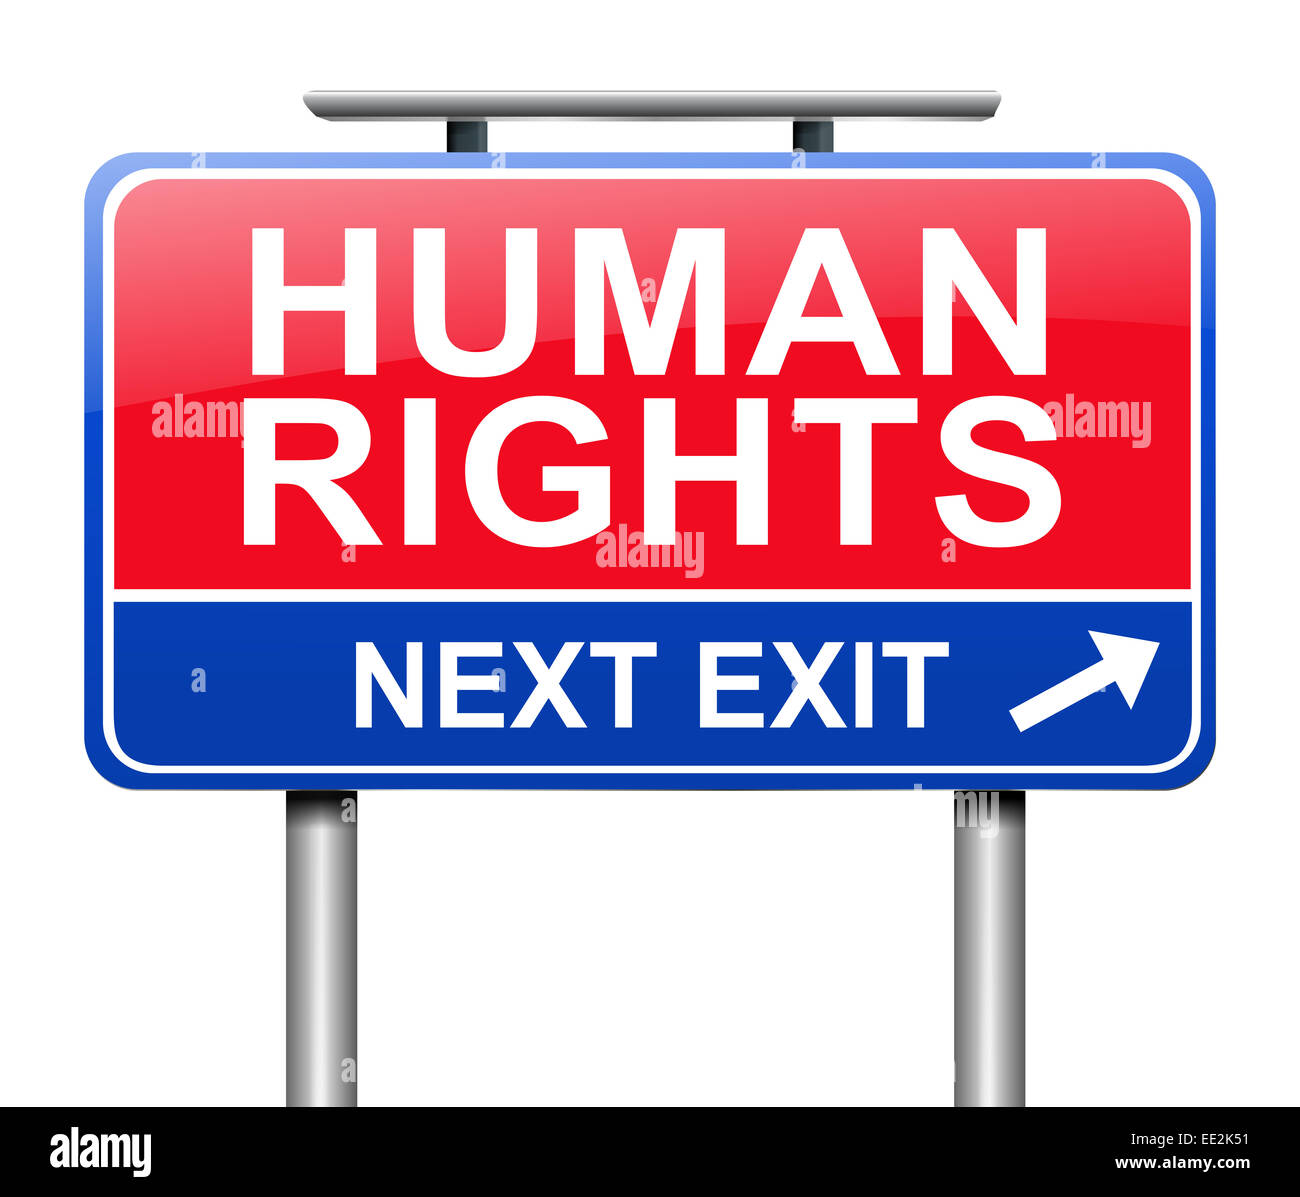 Human Rights concept. Stock Photo